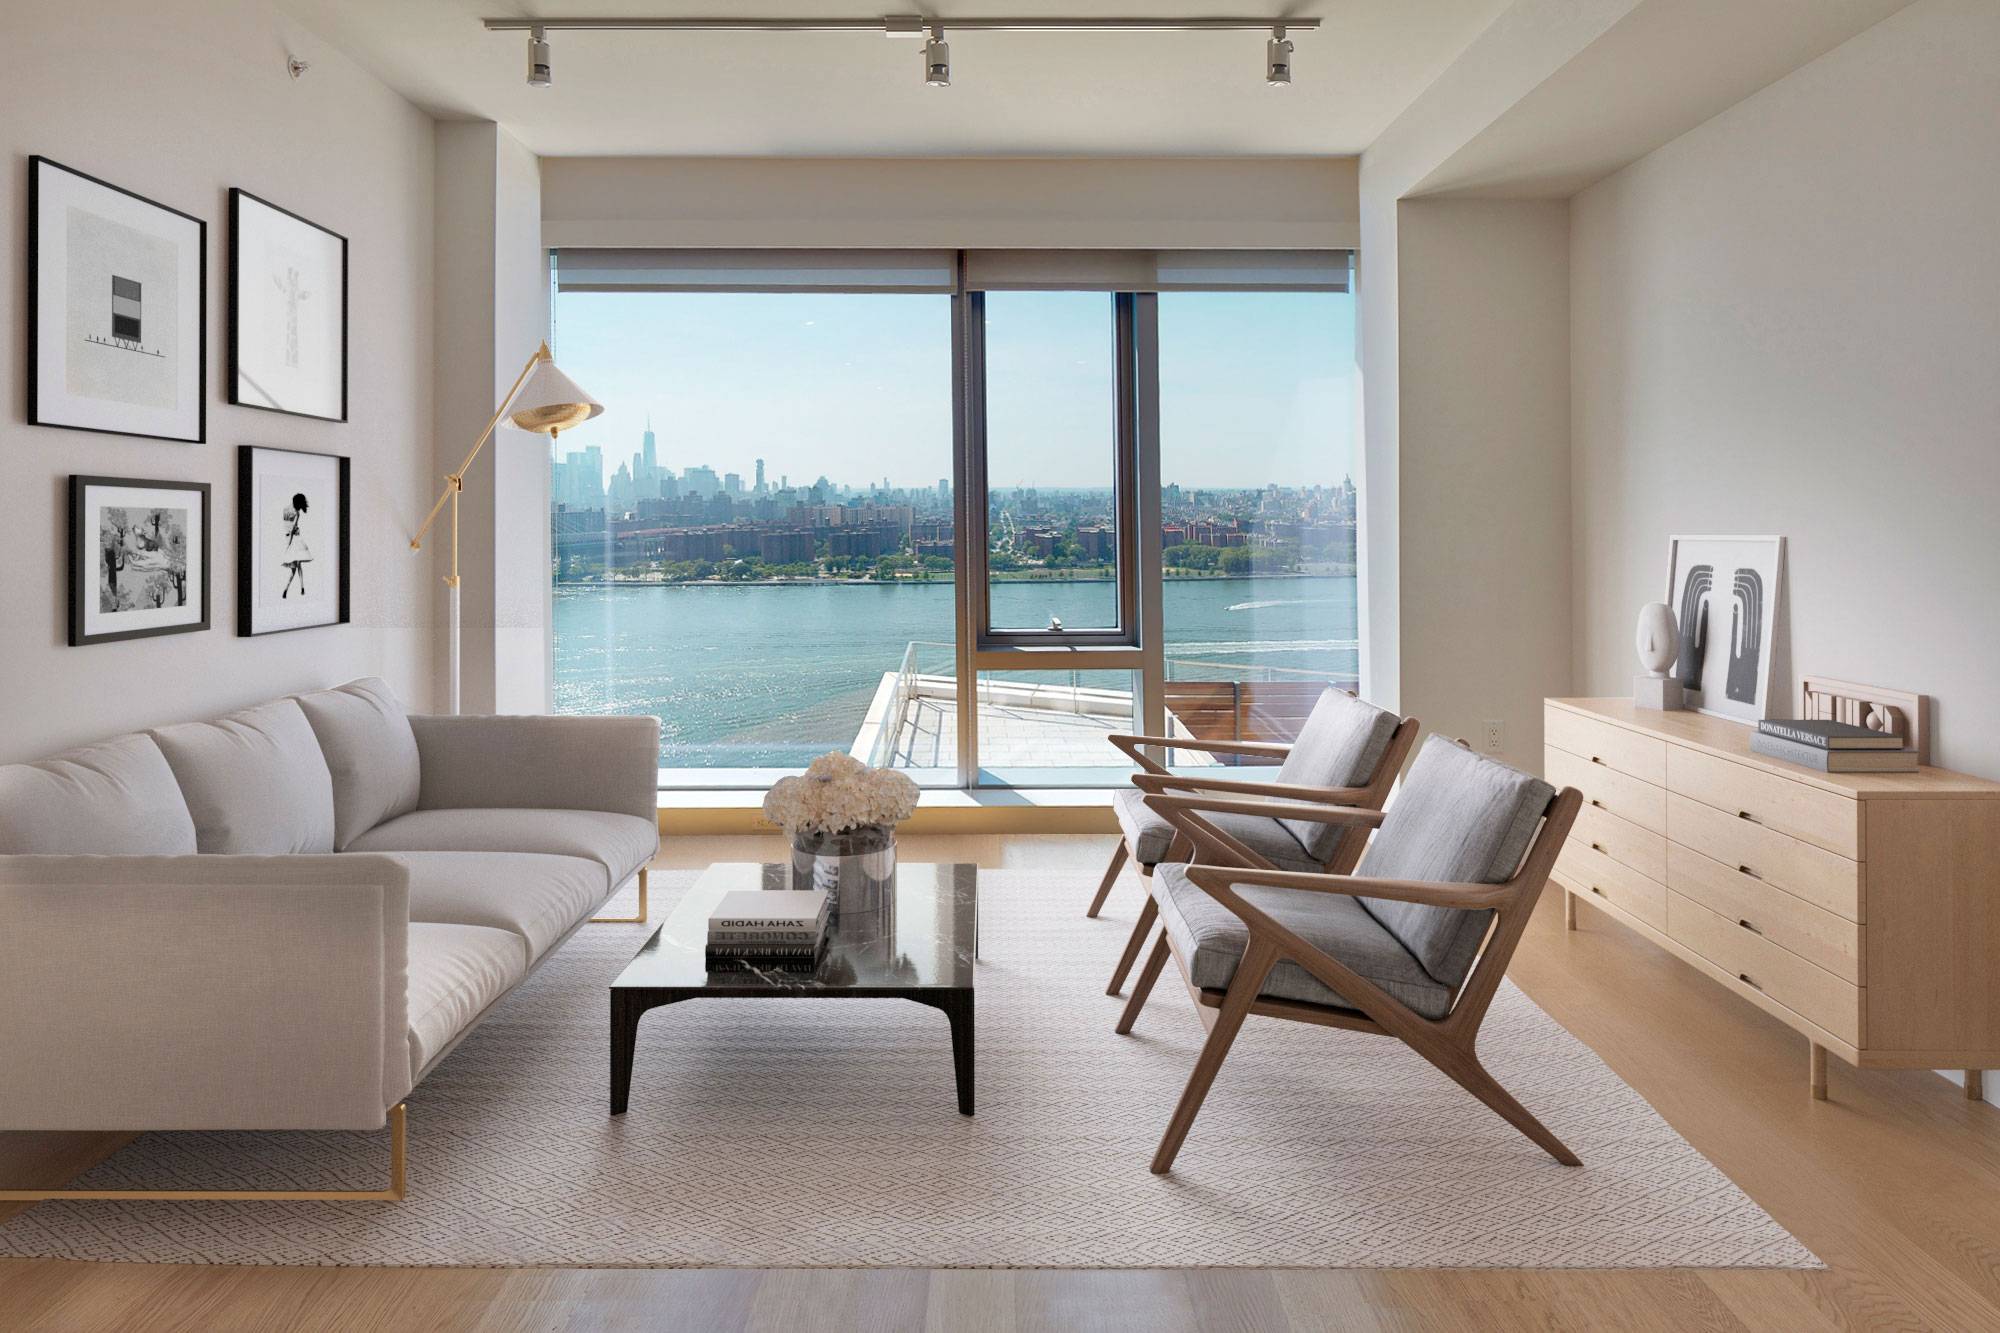 Showstopper 2BR/2BA, Luxury Building on Williamsburg Waterfront, Sweeping Views